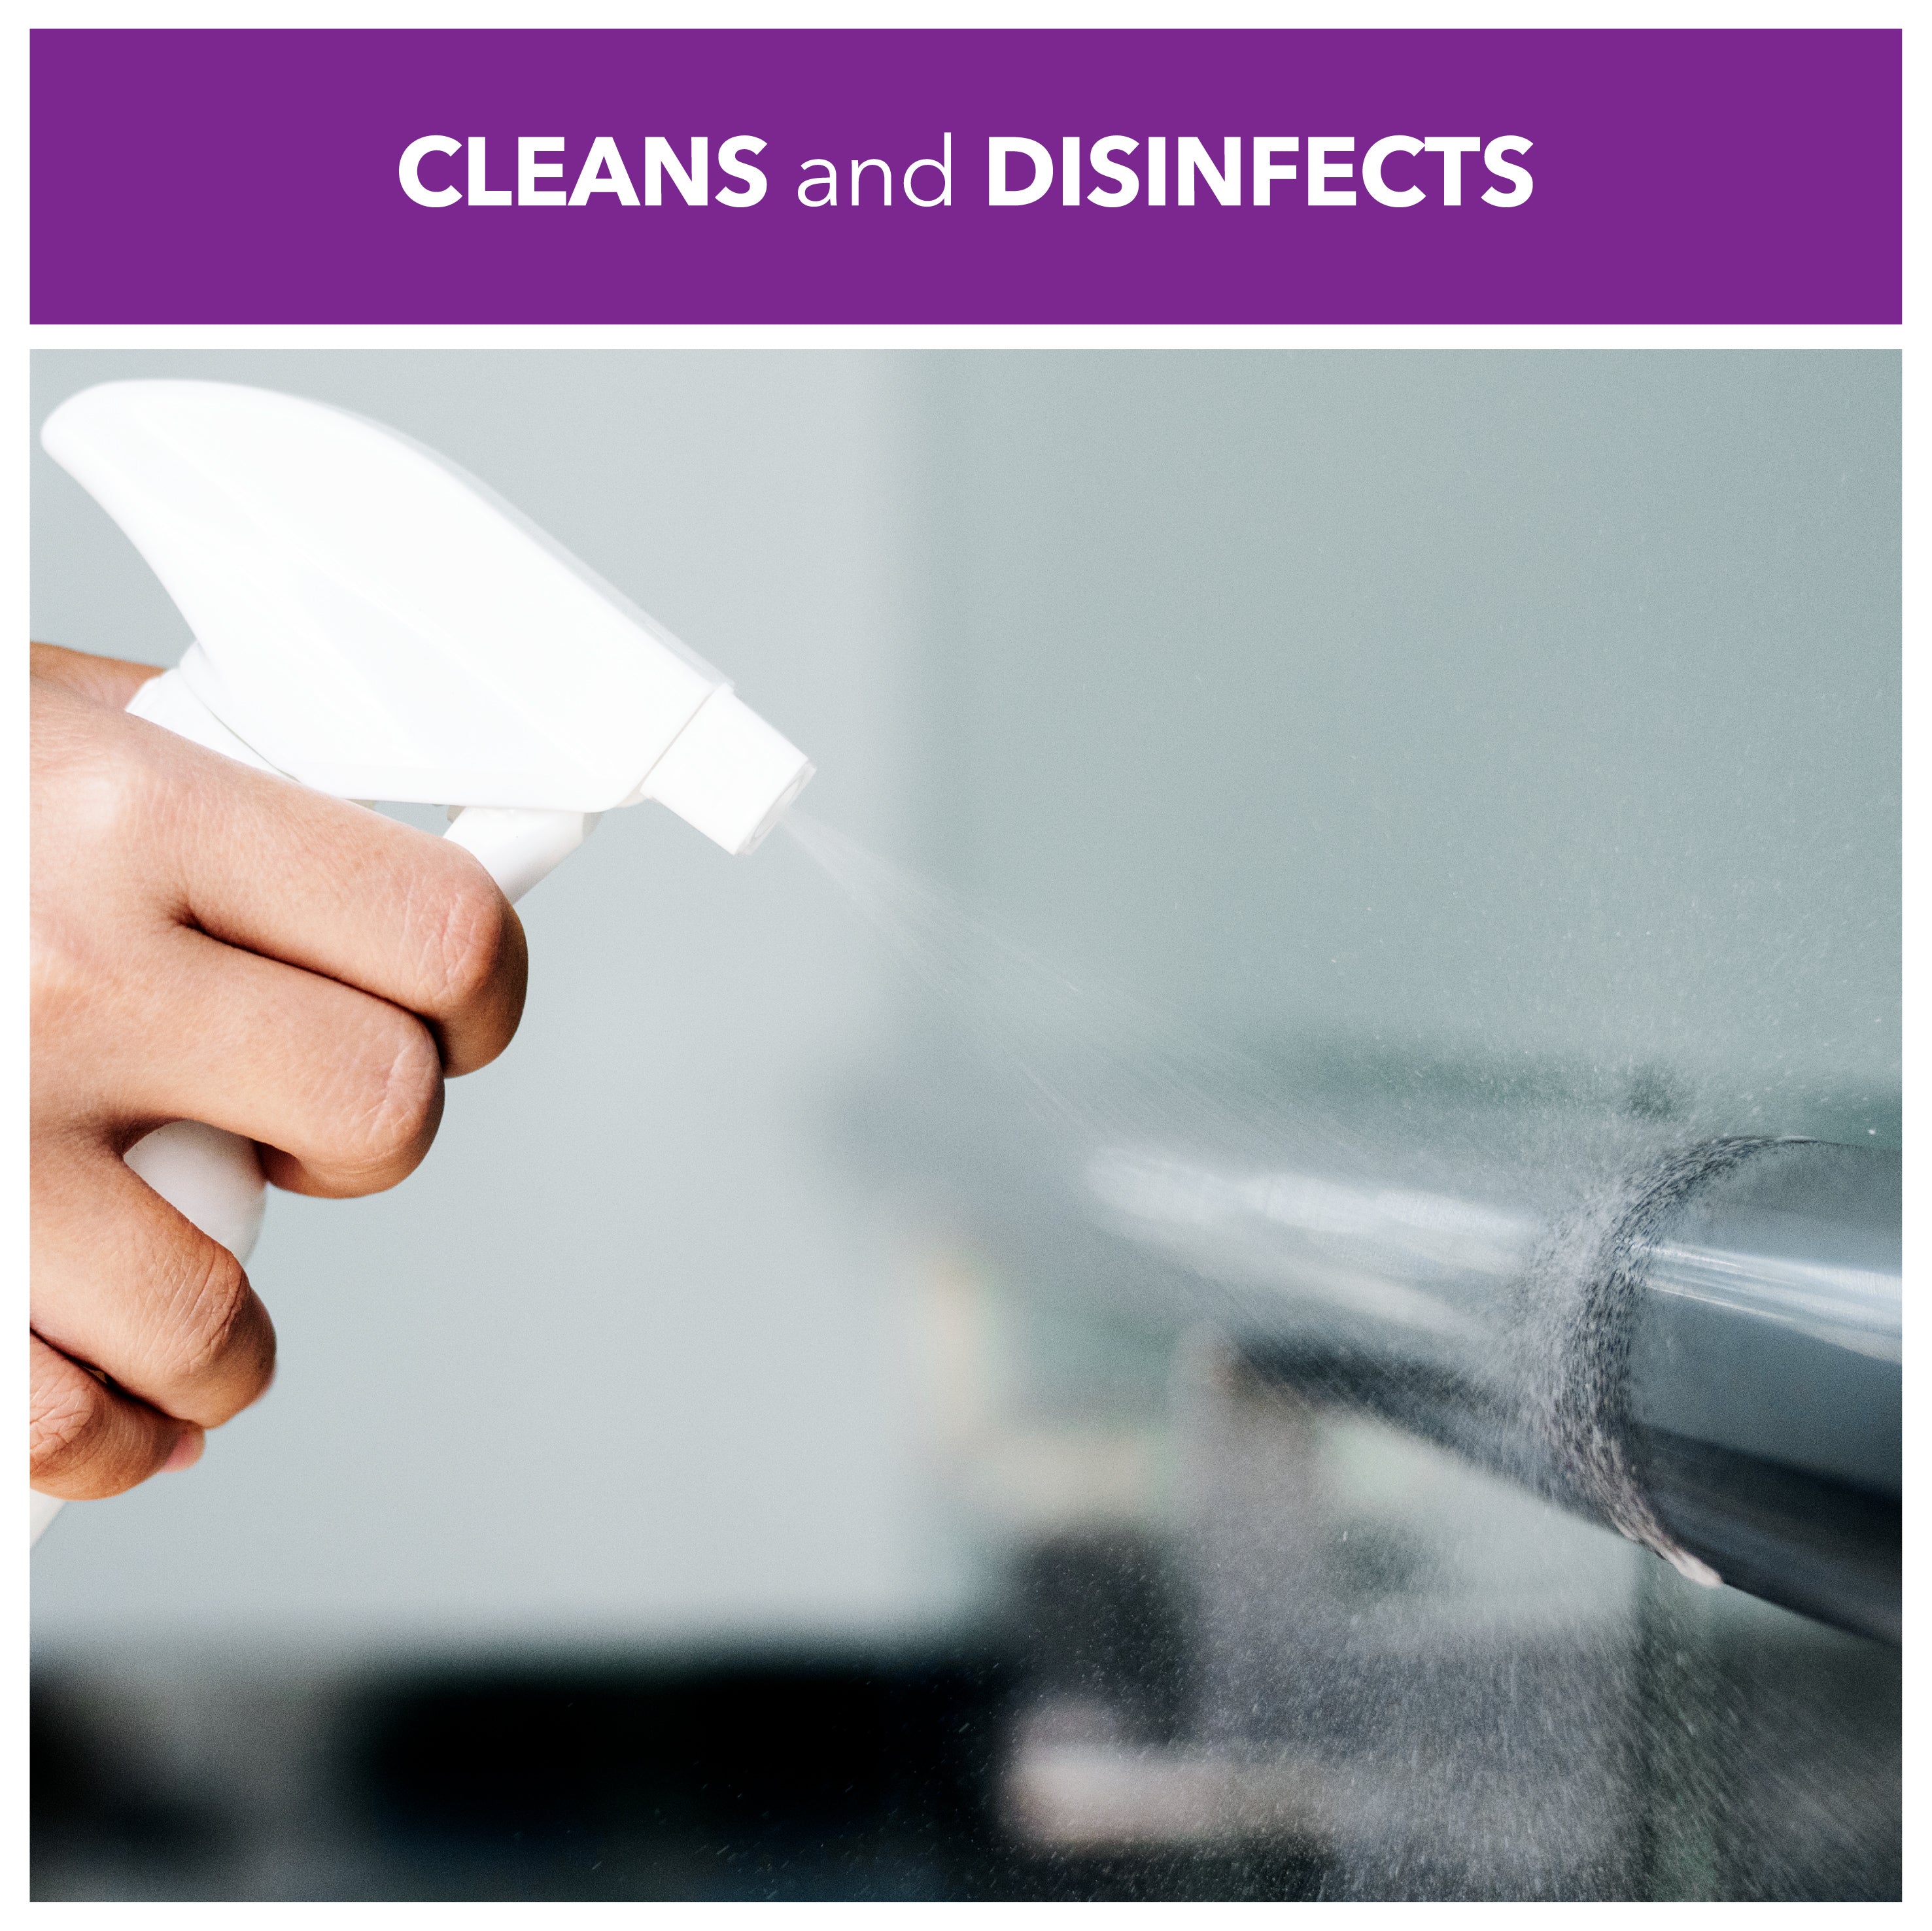 cleans and disinfects